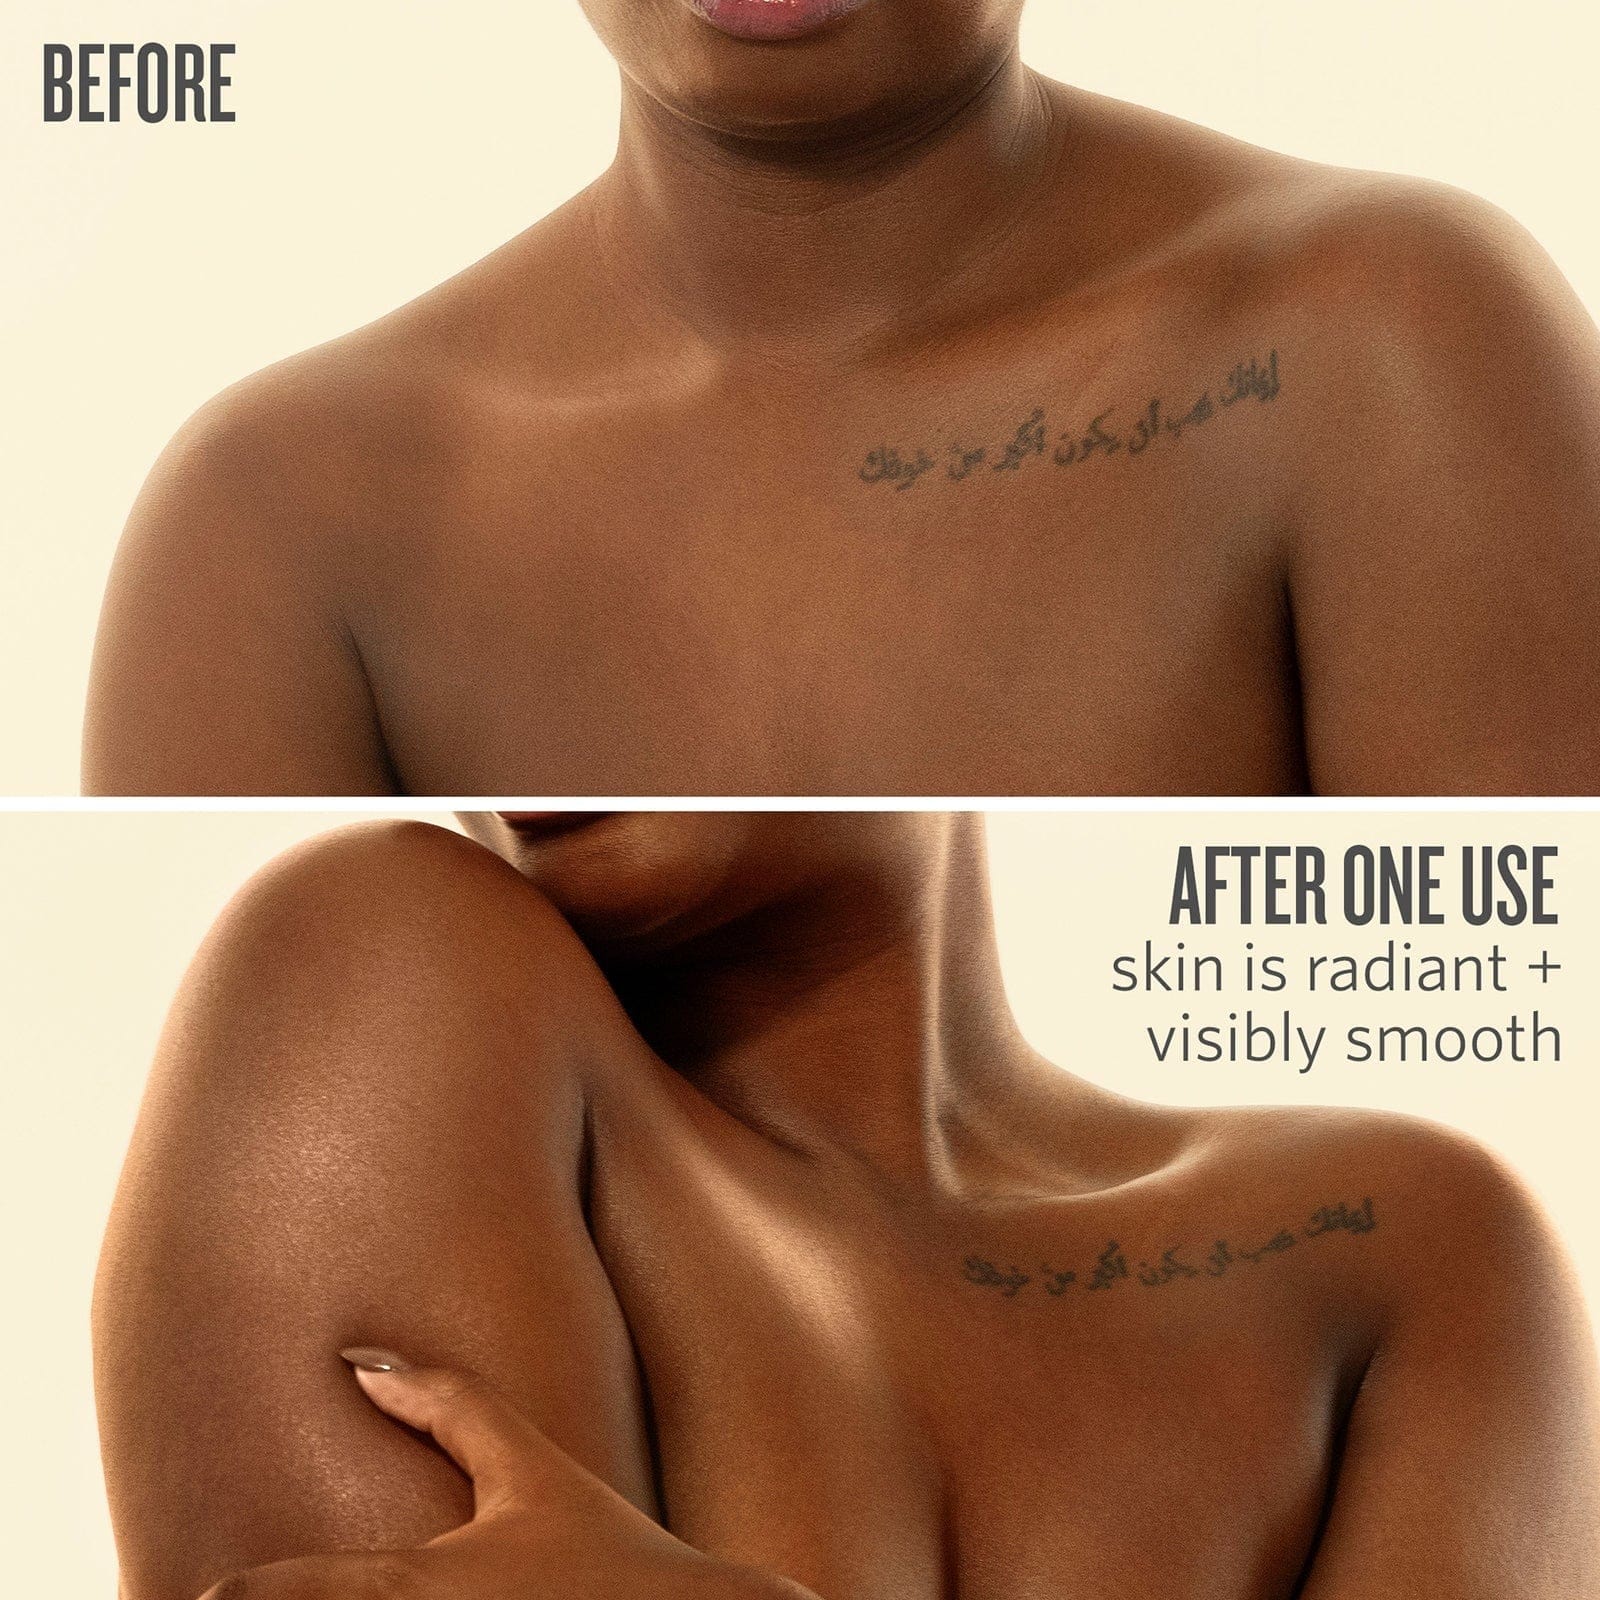 Before | After - After one use skin is radiance + visibly smooth